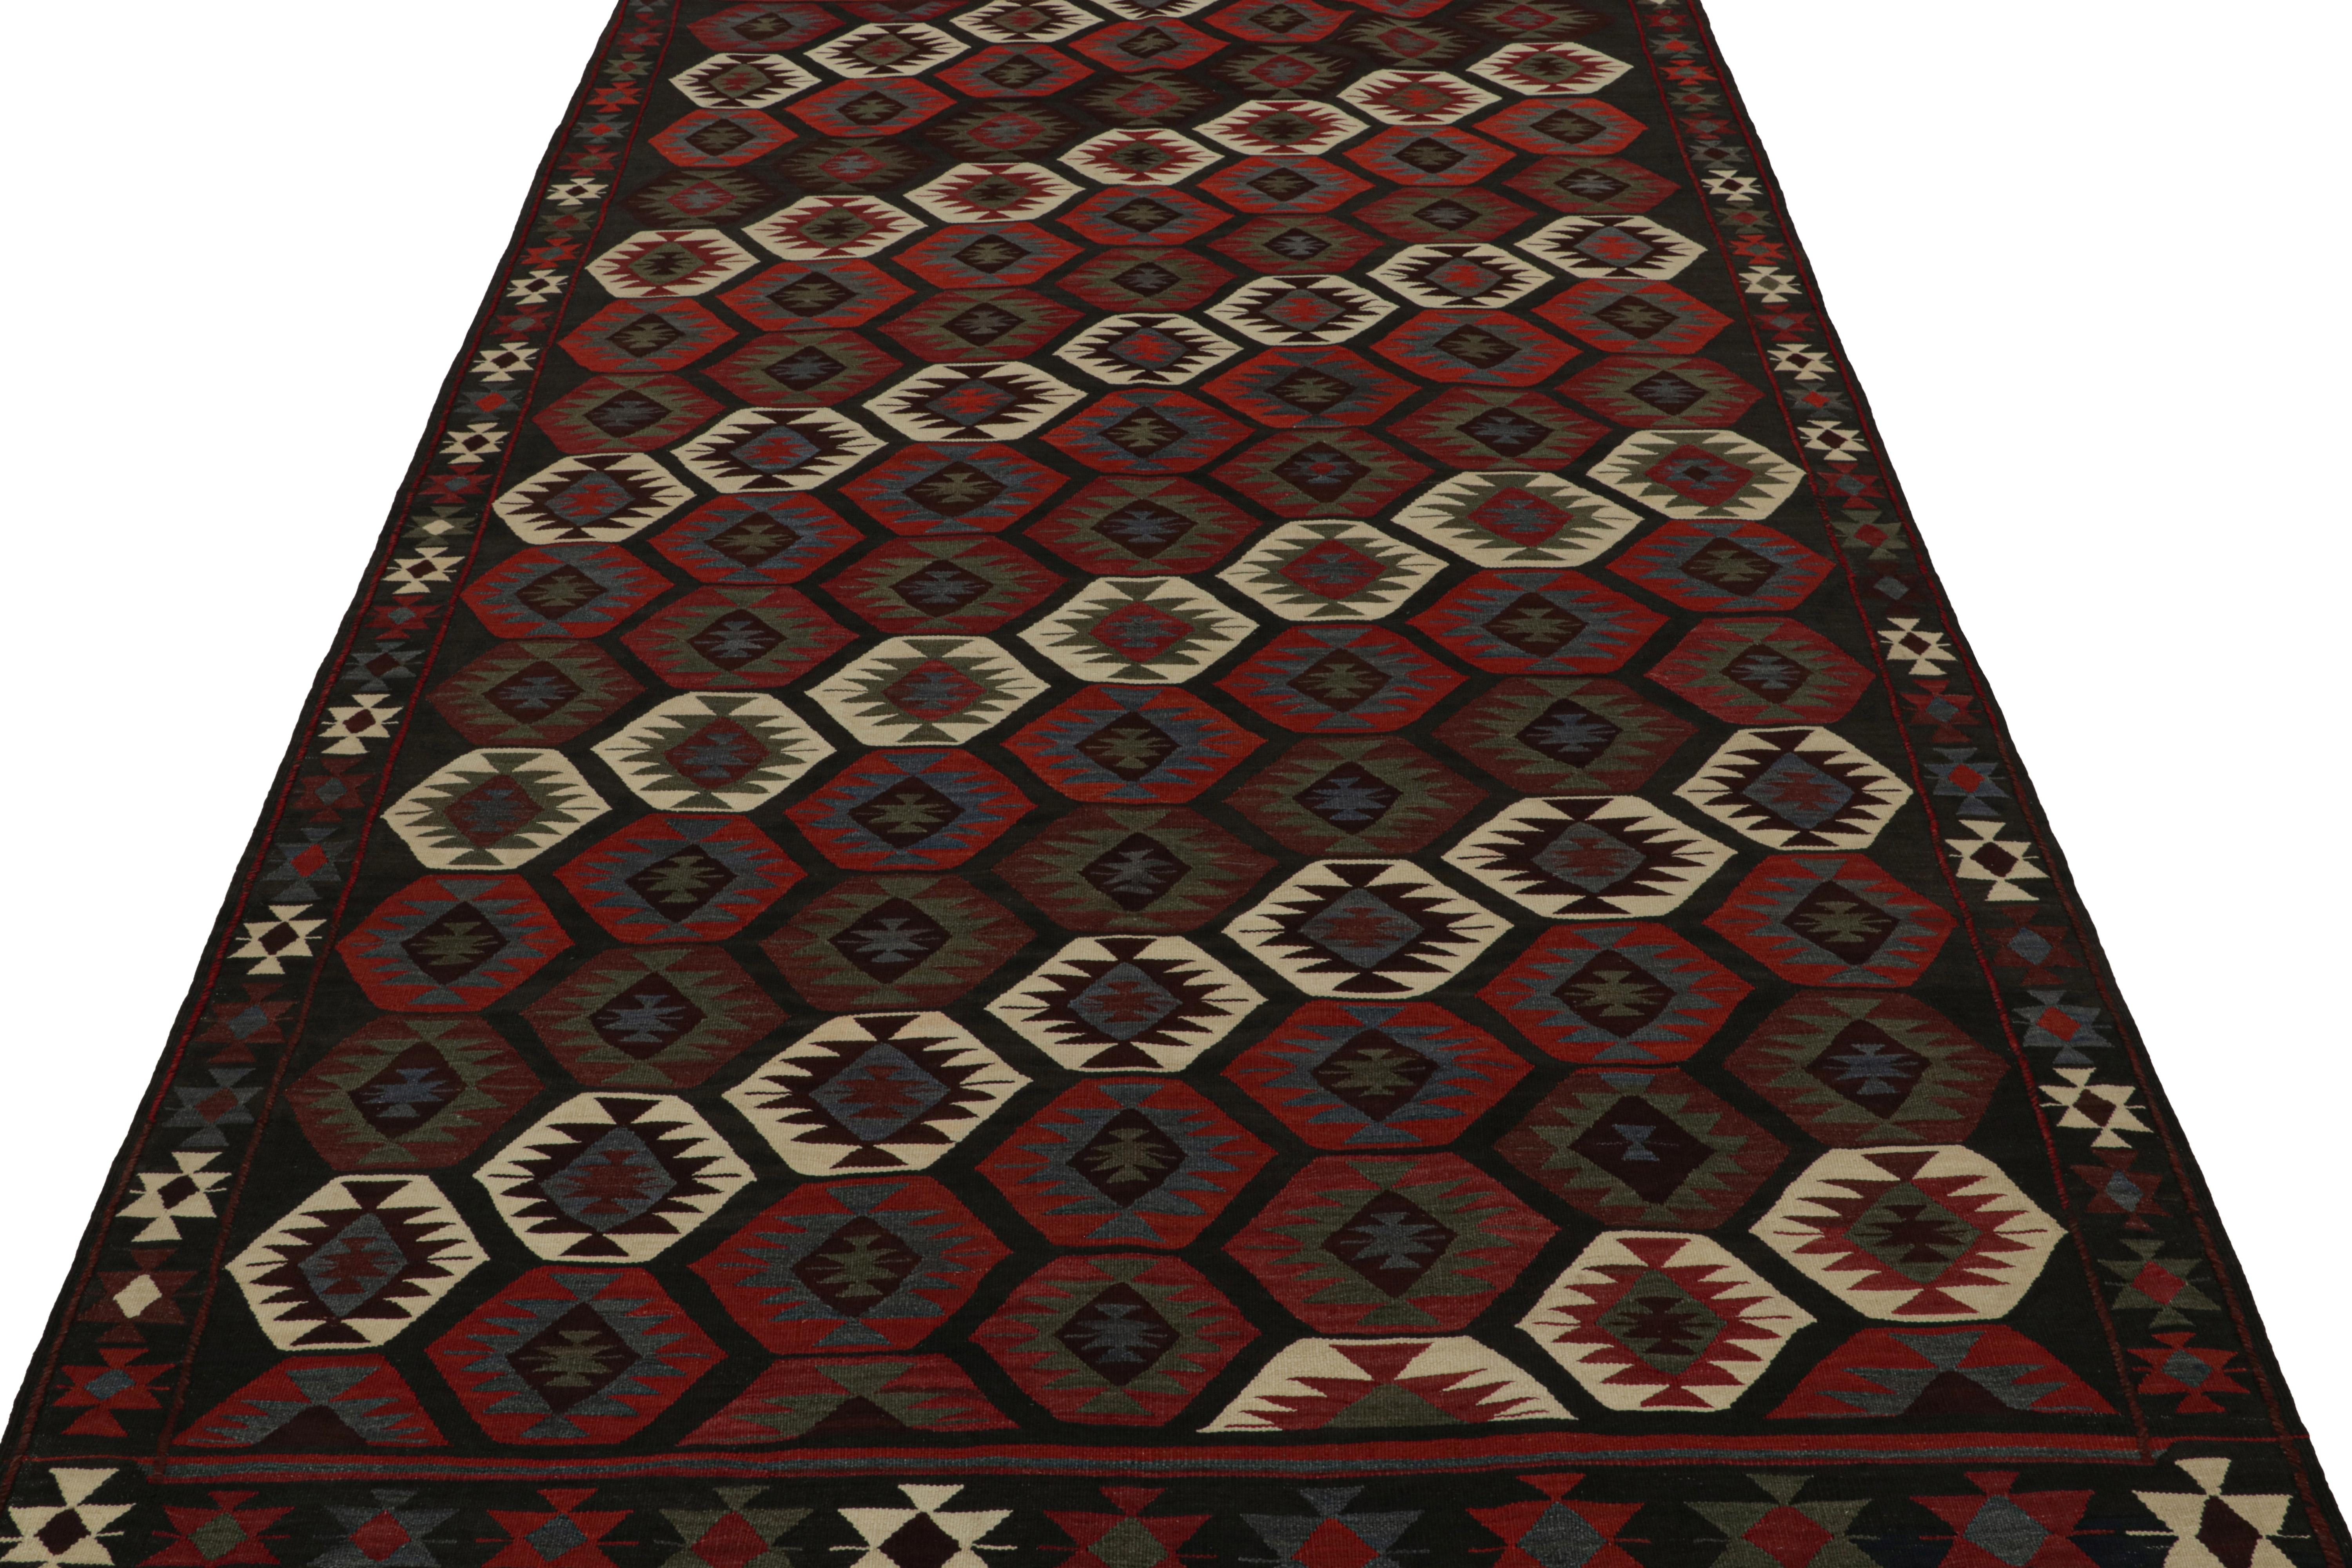 Hand-Woven Vintage Afghan Tribal Kilim with Red & Blue Geometric Patterns, from Rug & Kilim For Sale